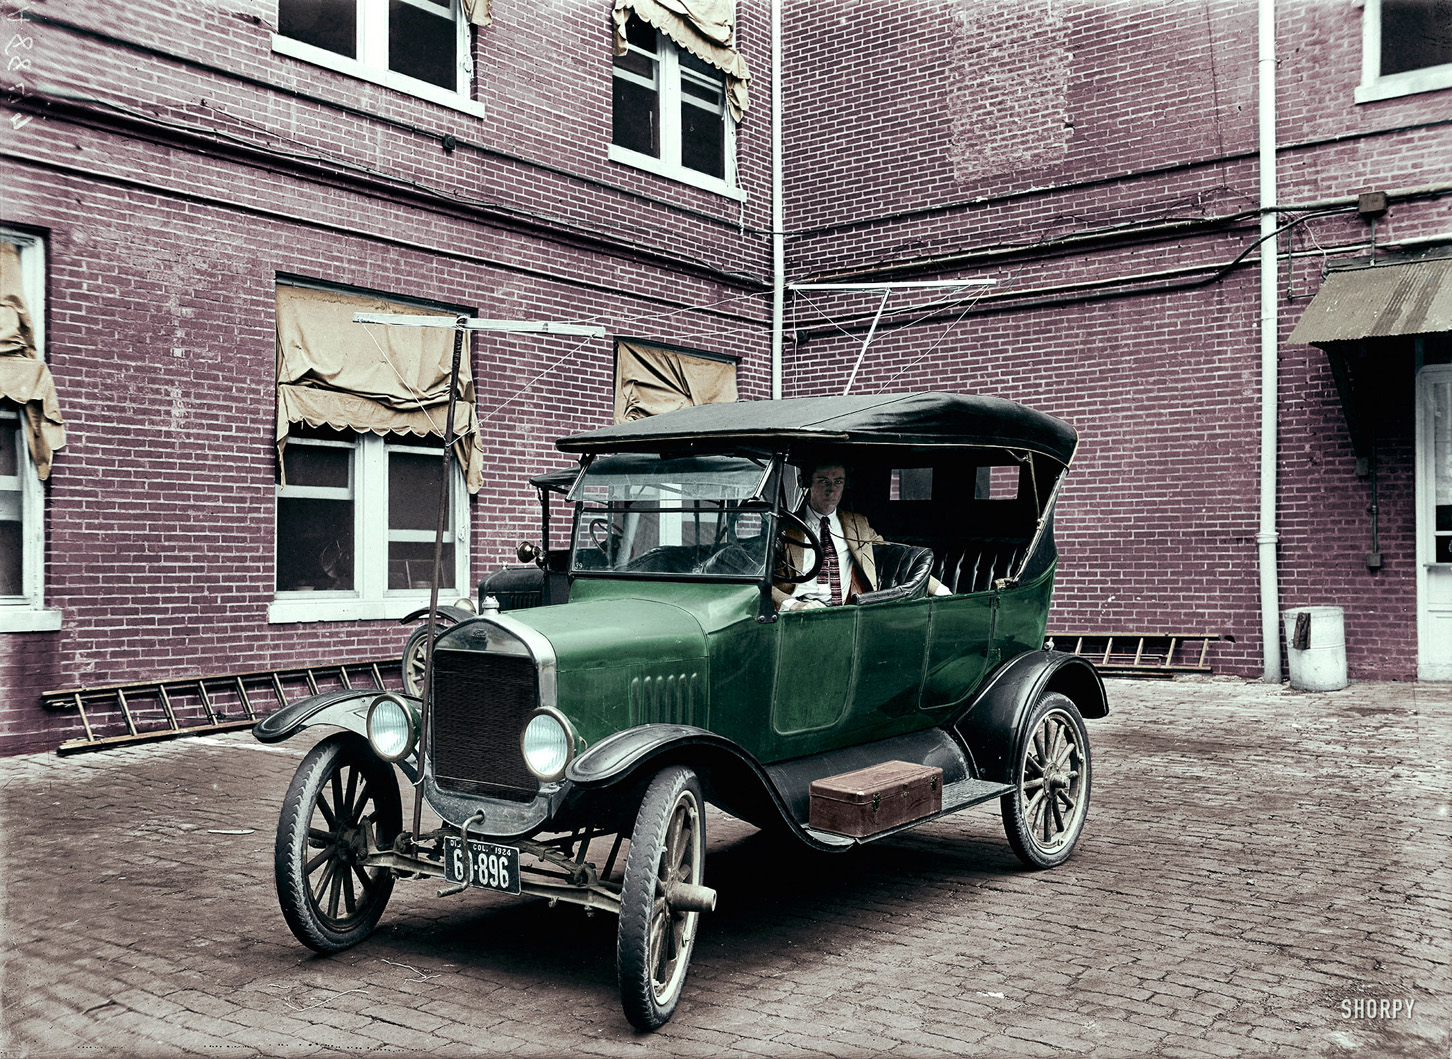 Colorized from this Shorpy photo. In the original the car seemed to be all black, but I thought I'd color it green for extra vibrance. View full size.